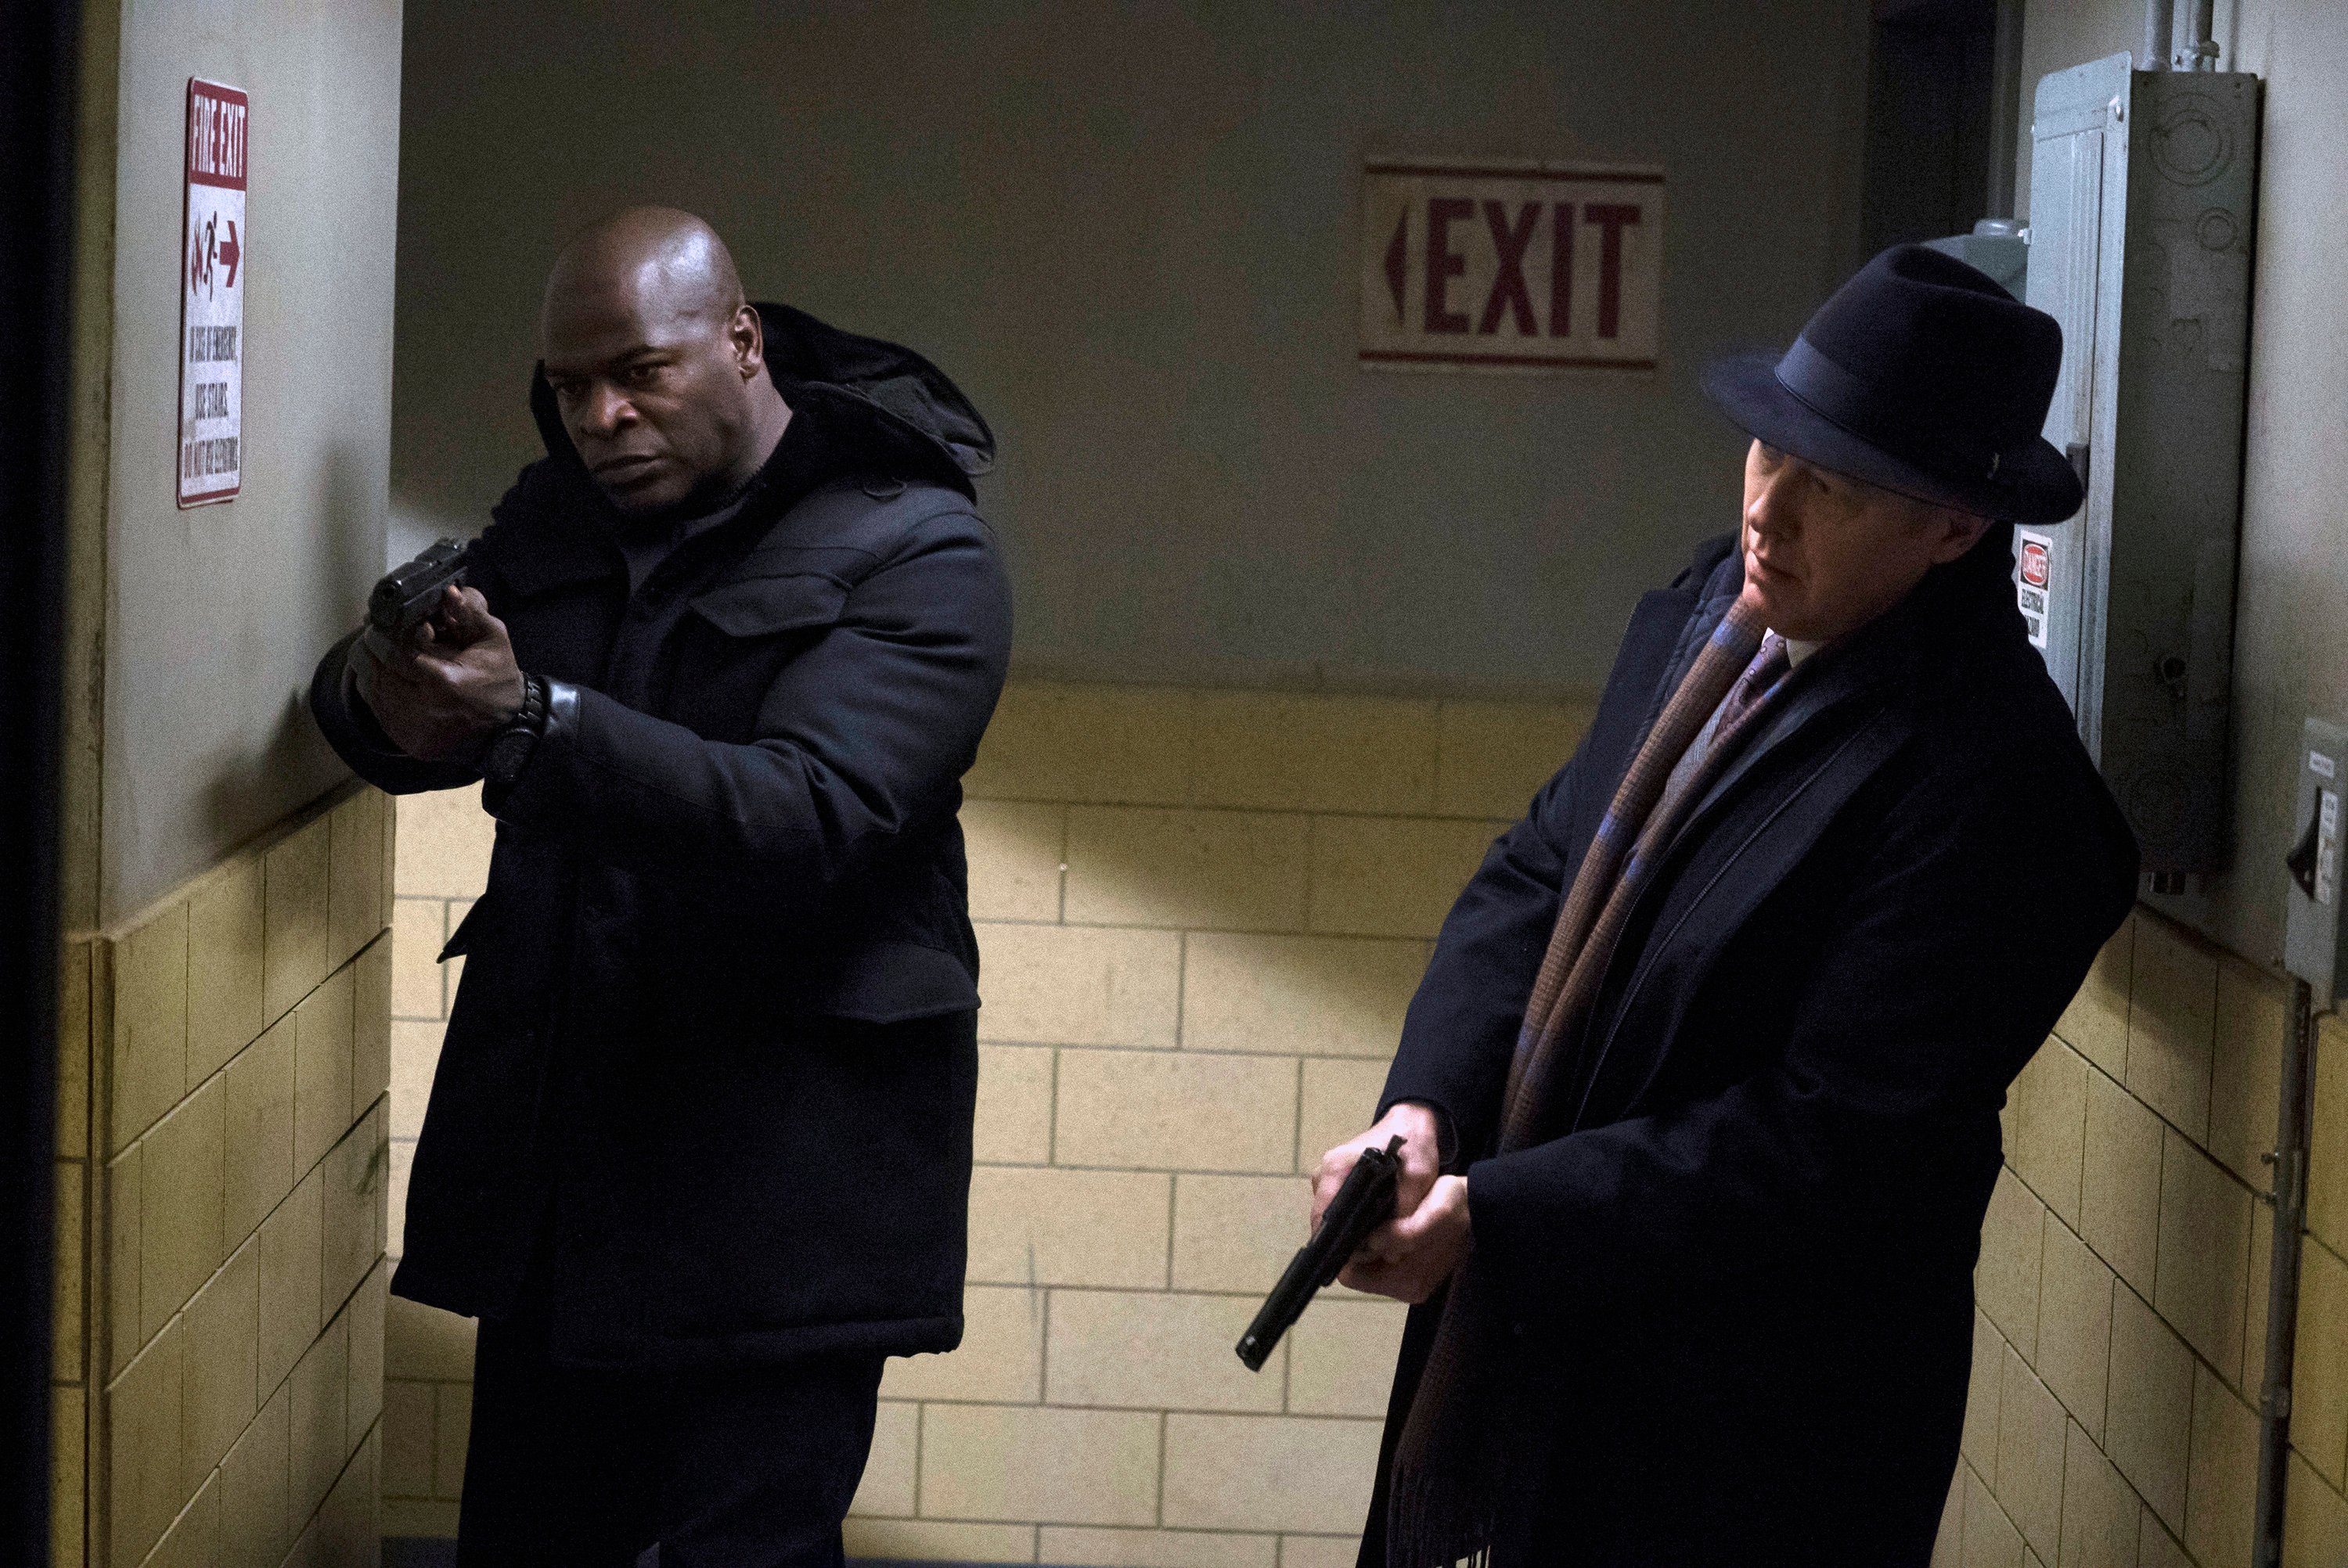 The Blacklist Season 9 stars Hisham Tawfiq and James Spader, in character as Dembe and Red,